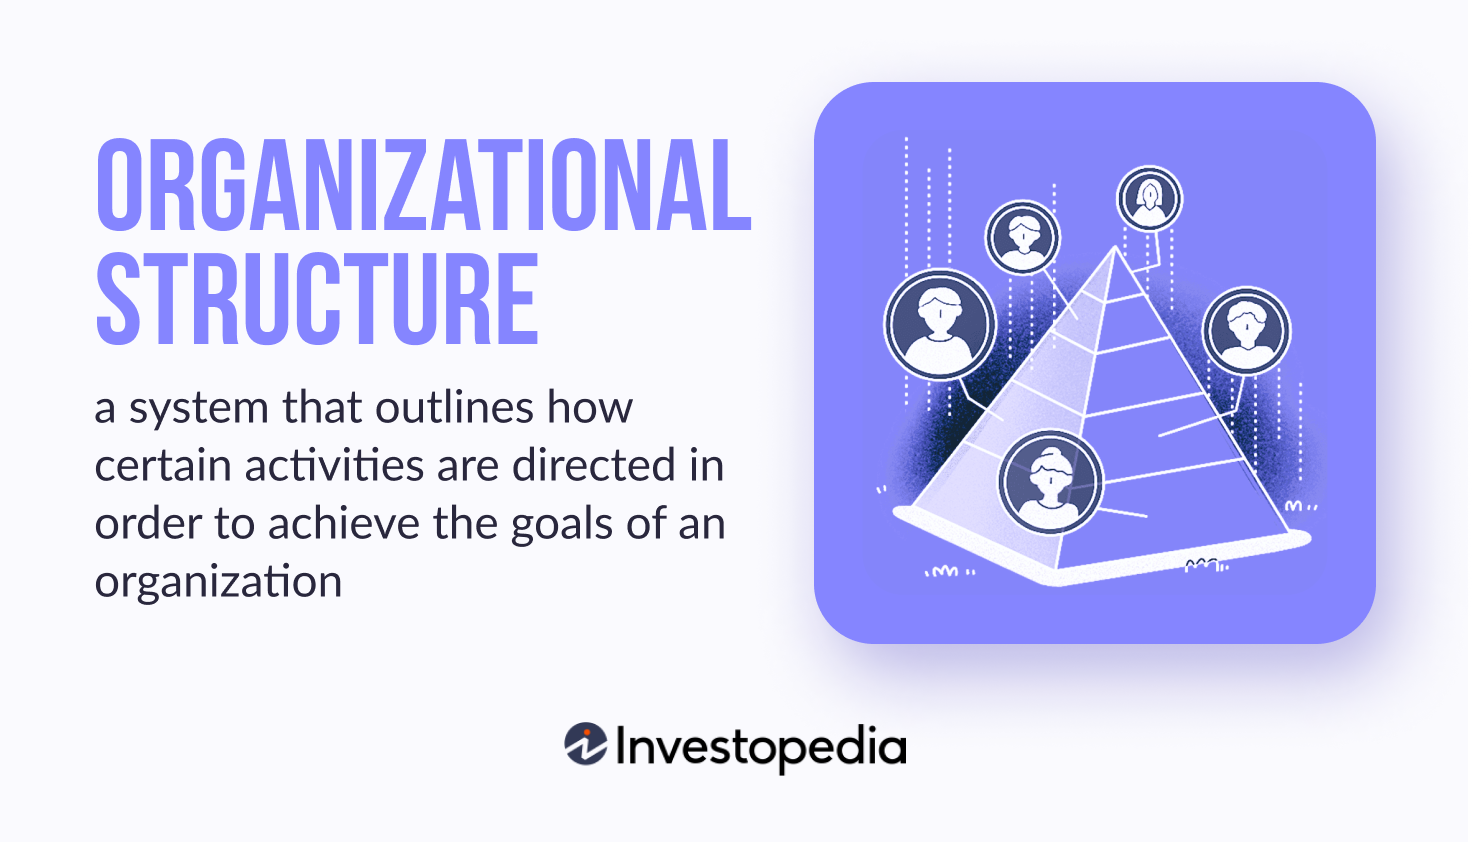 What is an organizational structure?